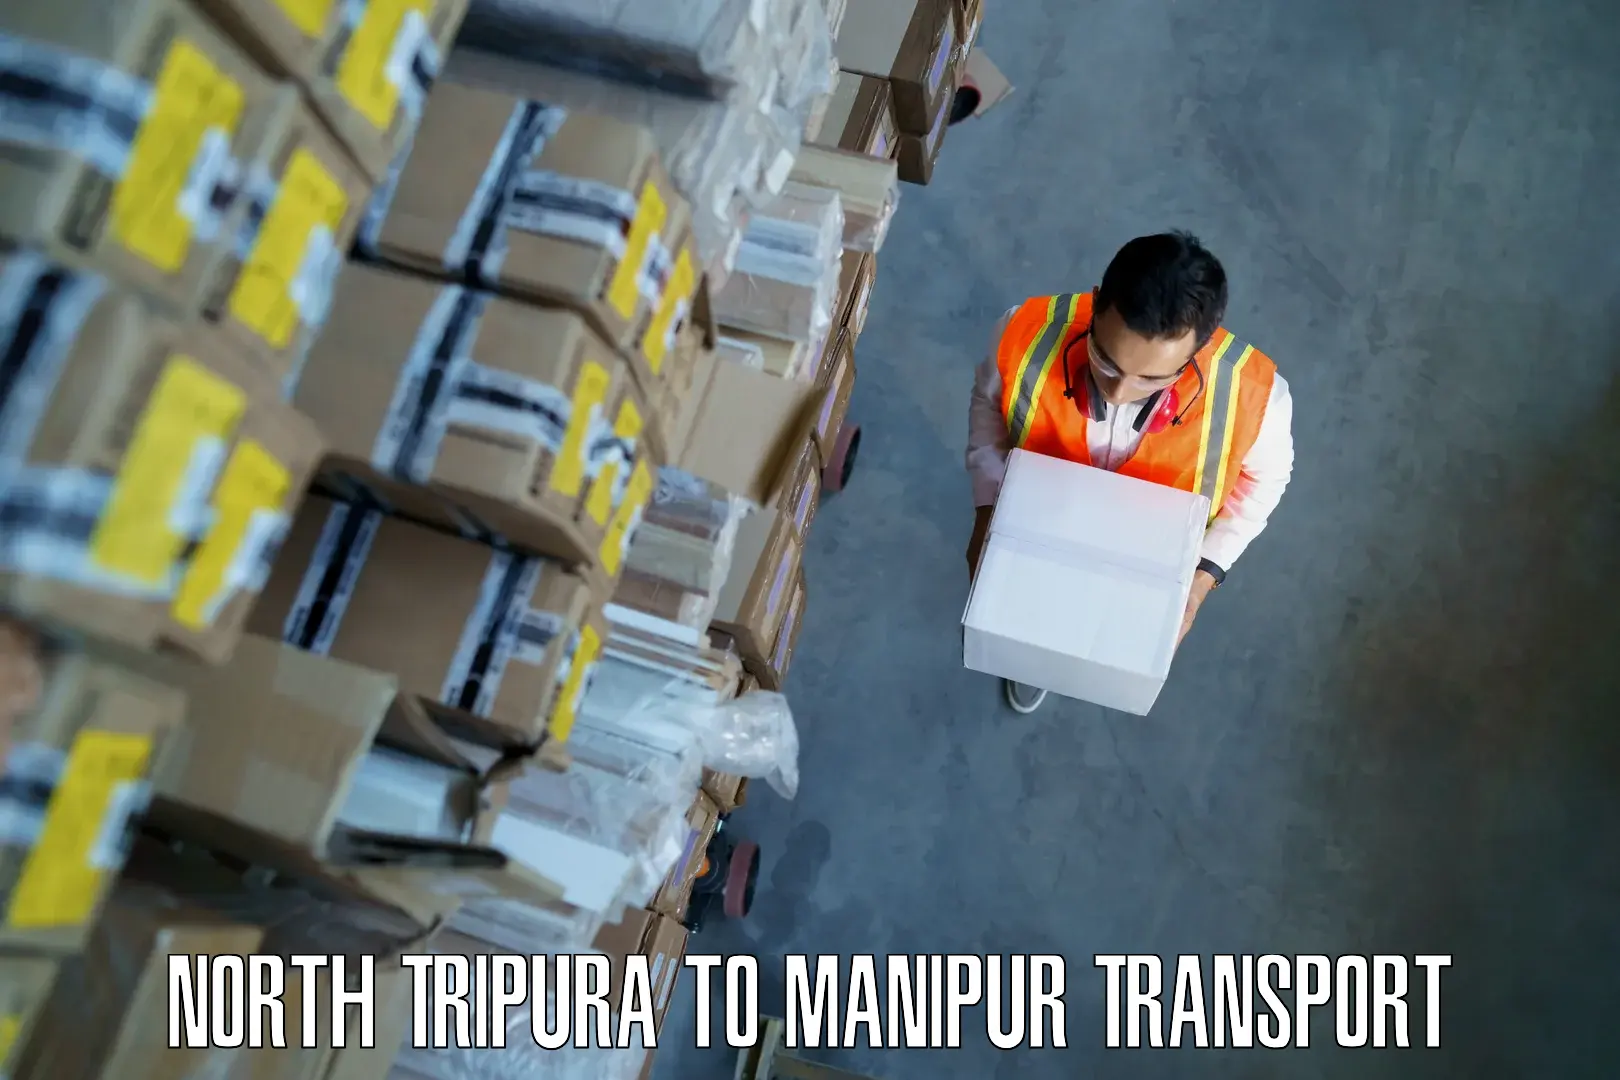 Vehicle parcel service North Tripura to Manipur